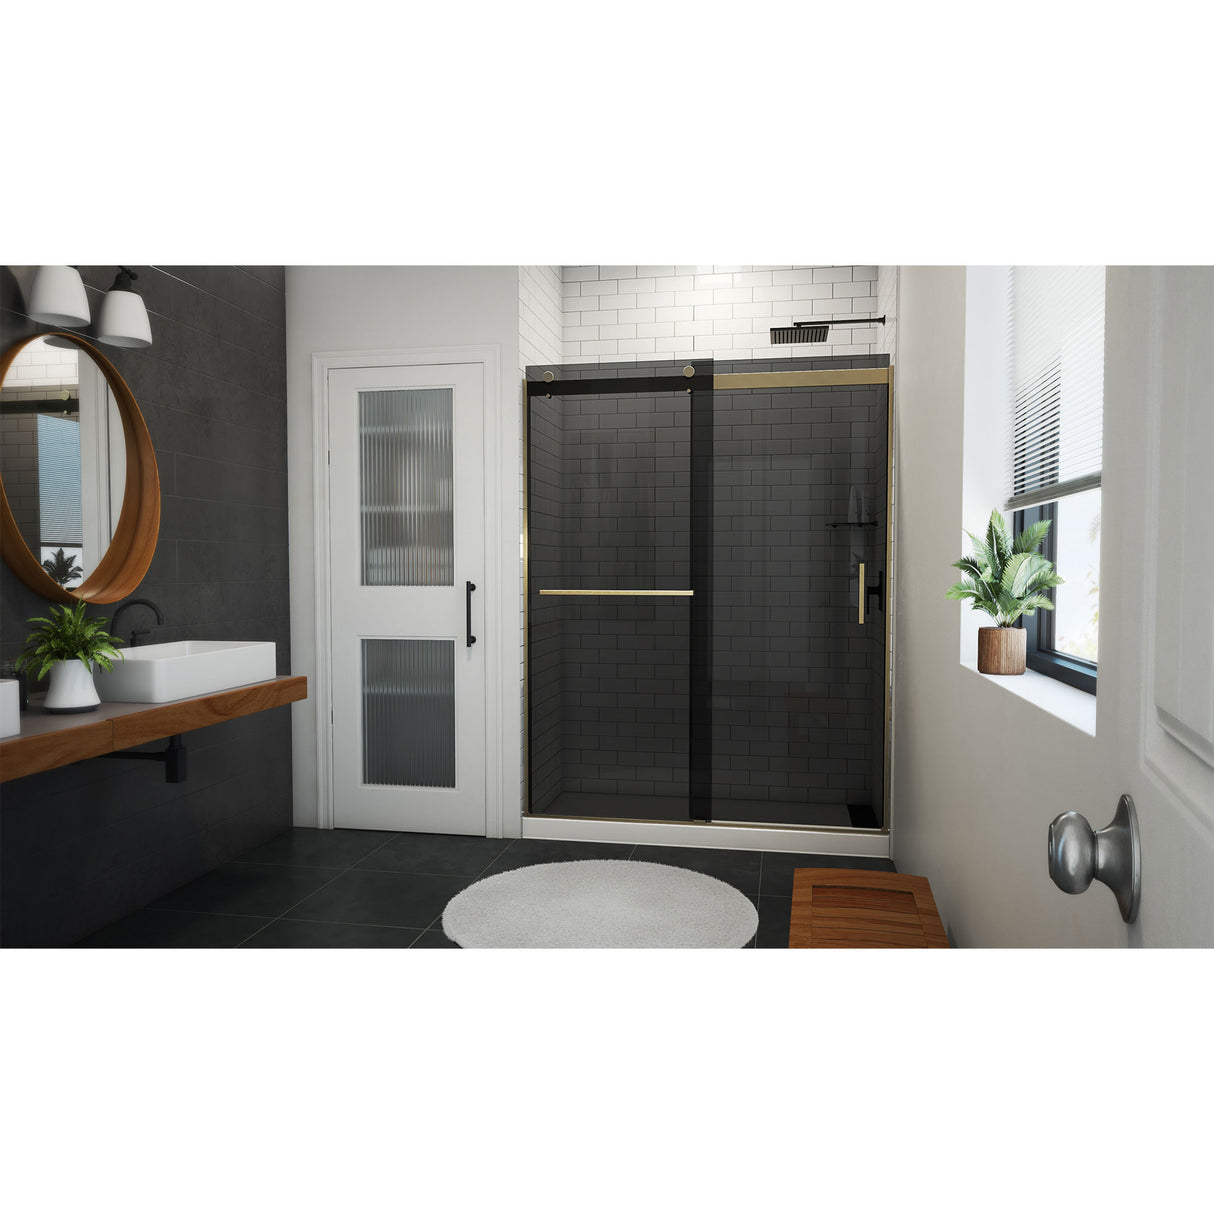 DreamLine Sapphire-V 56 - 60 in. W x 76 in. H Bypass Shower Door in Brushed Gold and Gray Glass